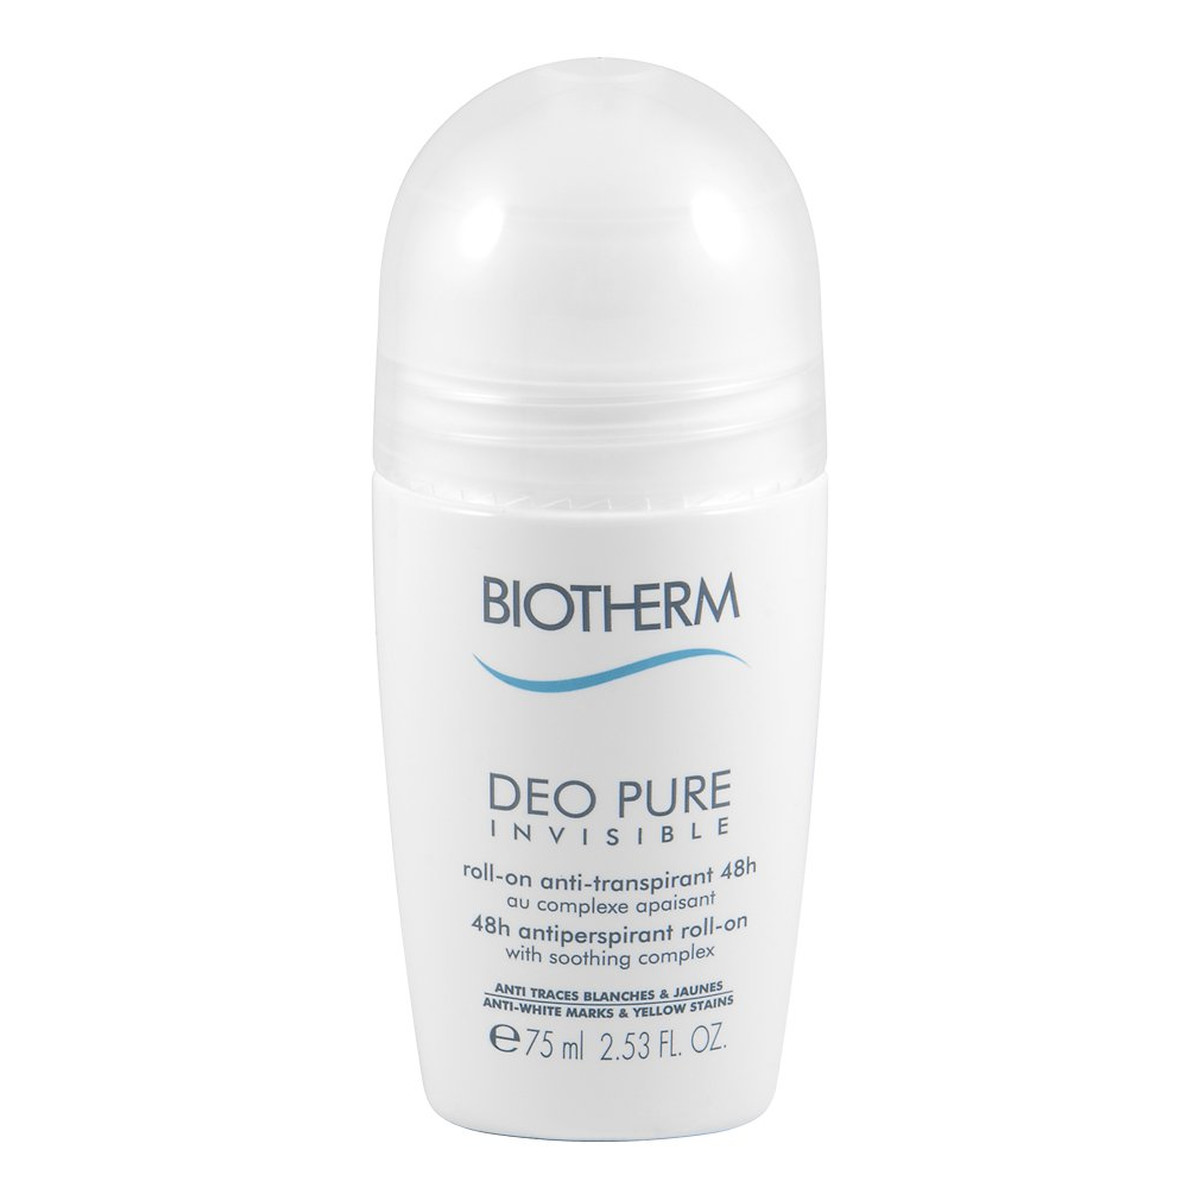 Biotherm Deo Pure Invisible Dezodorant roll-on 75ml